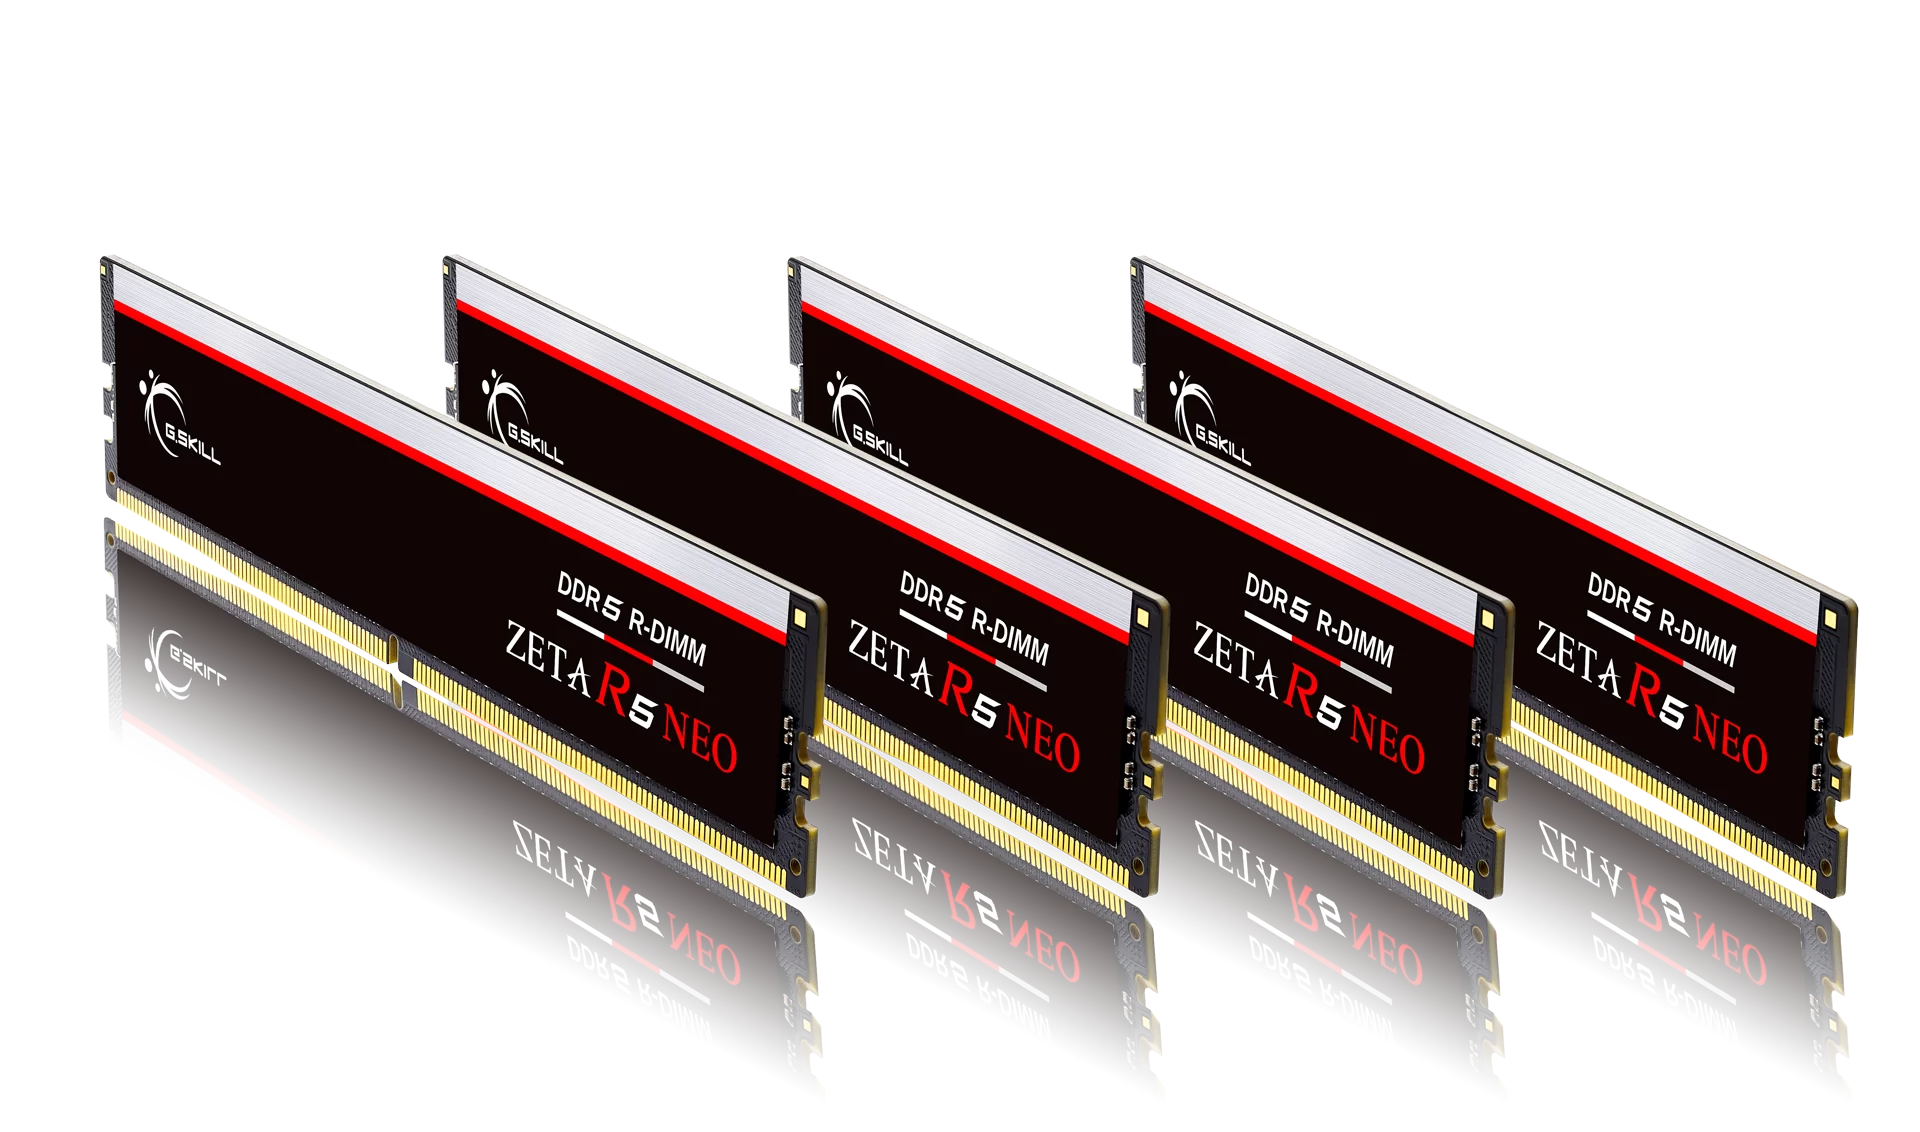 G.Skill launches Zeta R5 Neo DDR5-6400 RDIMM memory for 